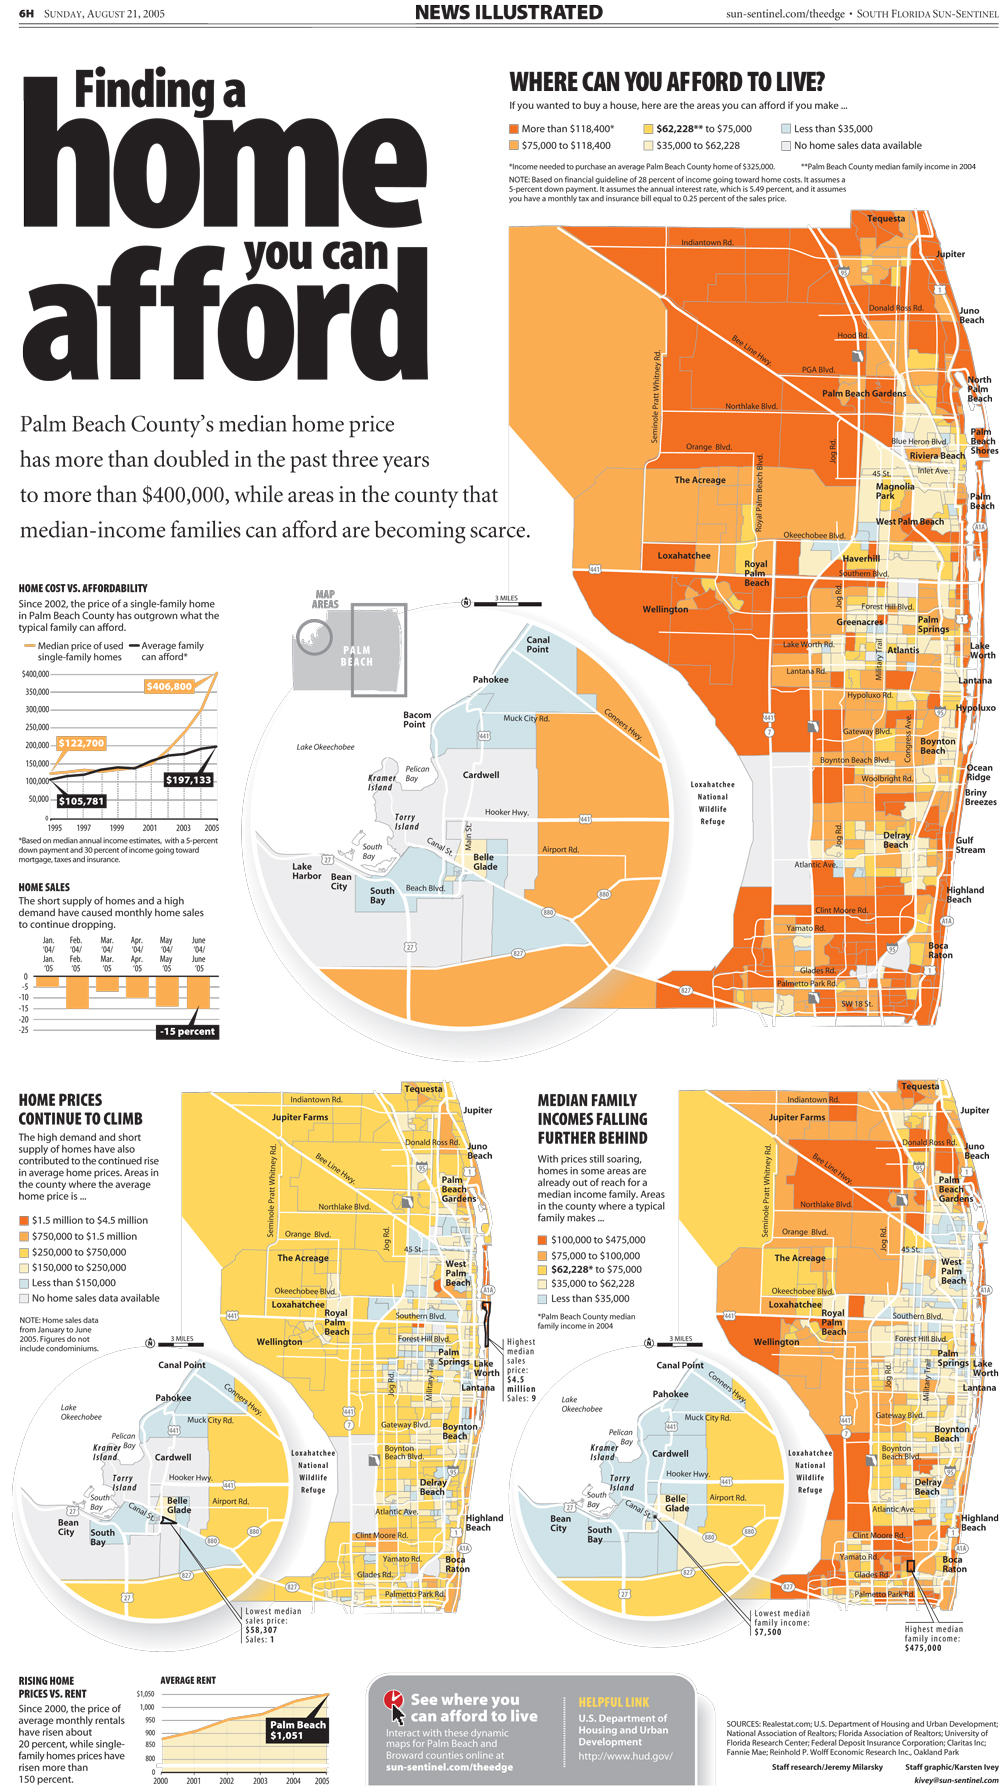 palm beach home prices news illustrated infographic